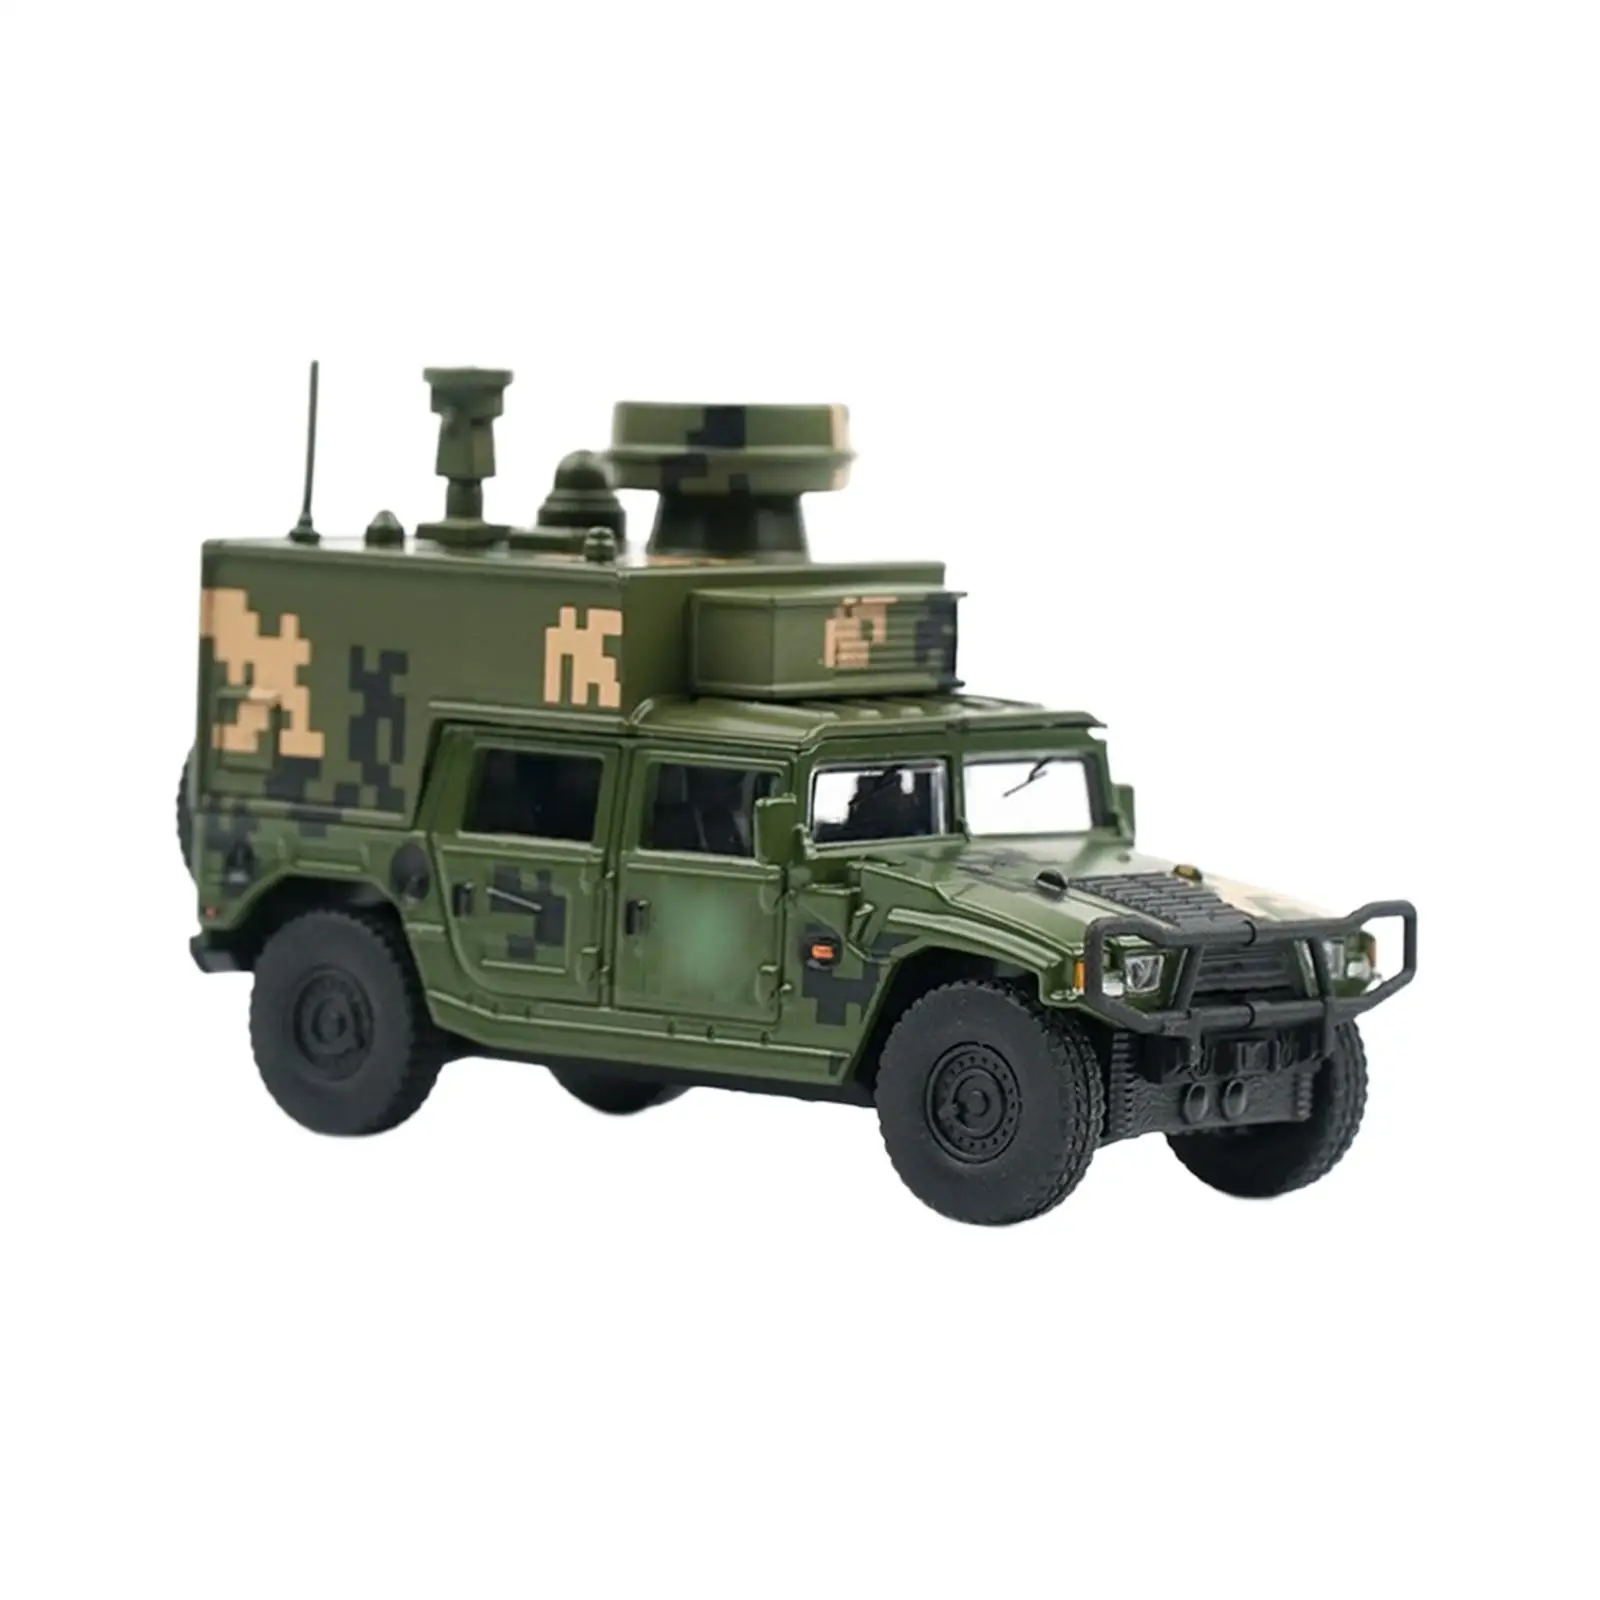 

1:64 Classic Model Car Collectible Party Favors Diecast Truck Metal Armored Vehicle for Toddlers Adults Kids Boy Girl Children